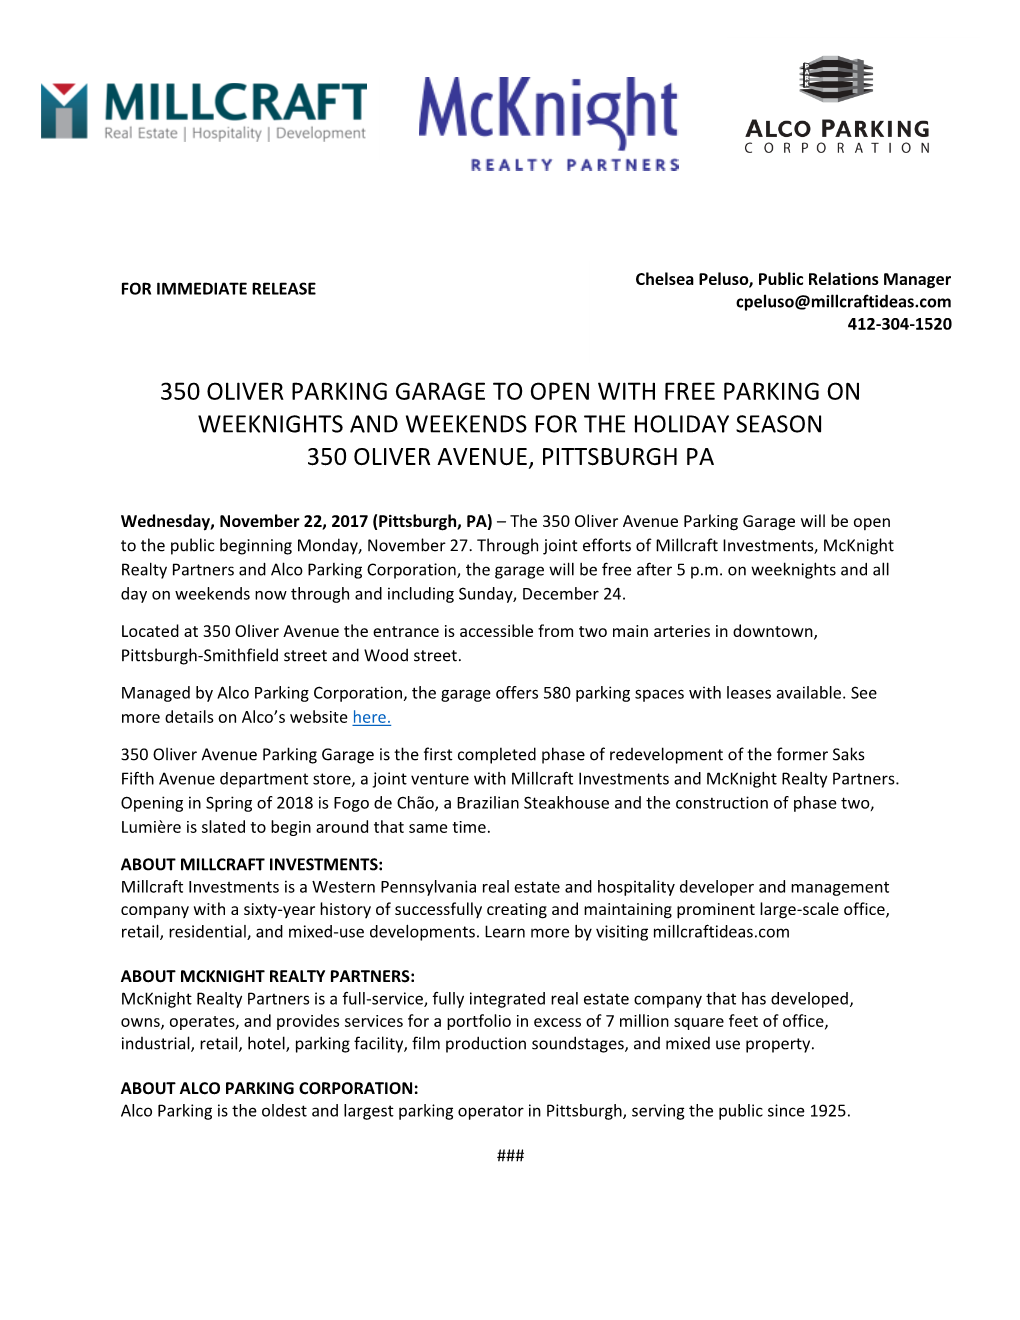 350 Oliver Parking Garage to Open with Free Parking on Weeknights and Weekends for the Holiday Season 350 Oliver Avenue, Pittsburgh Pa